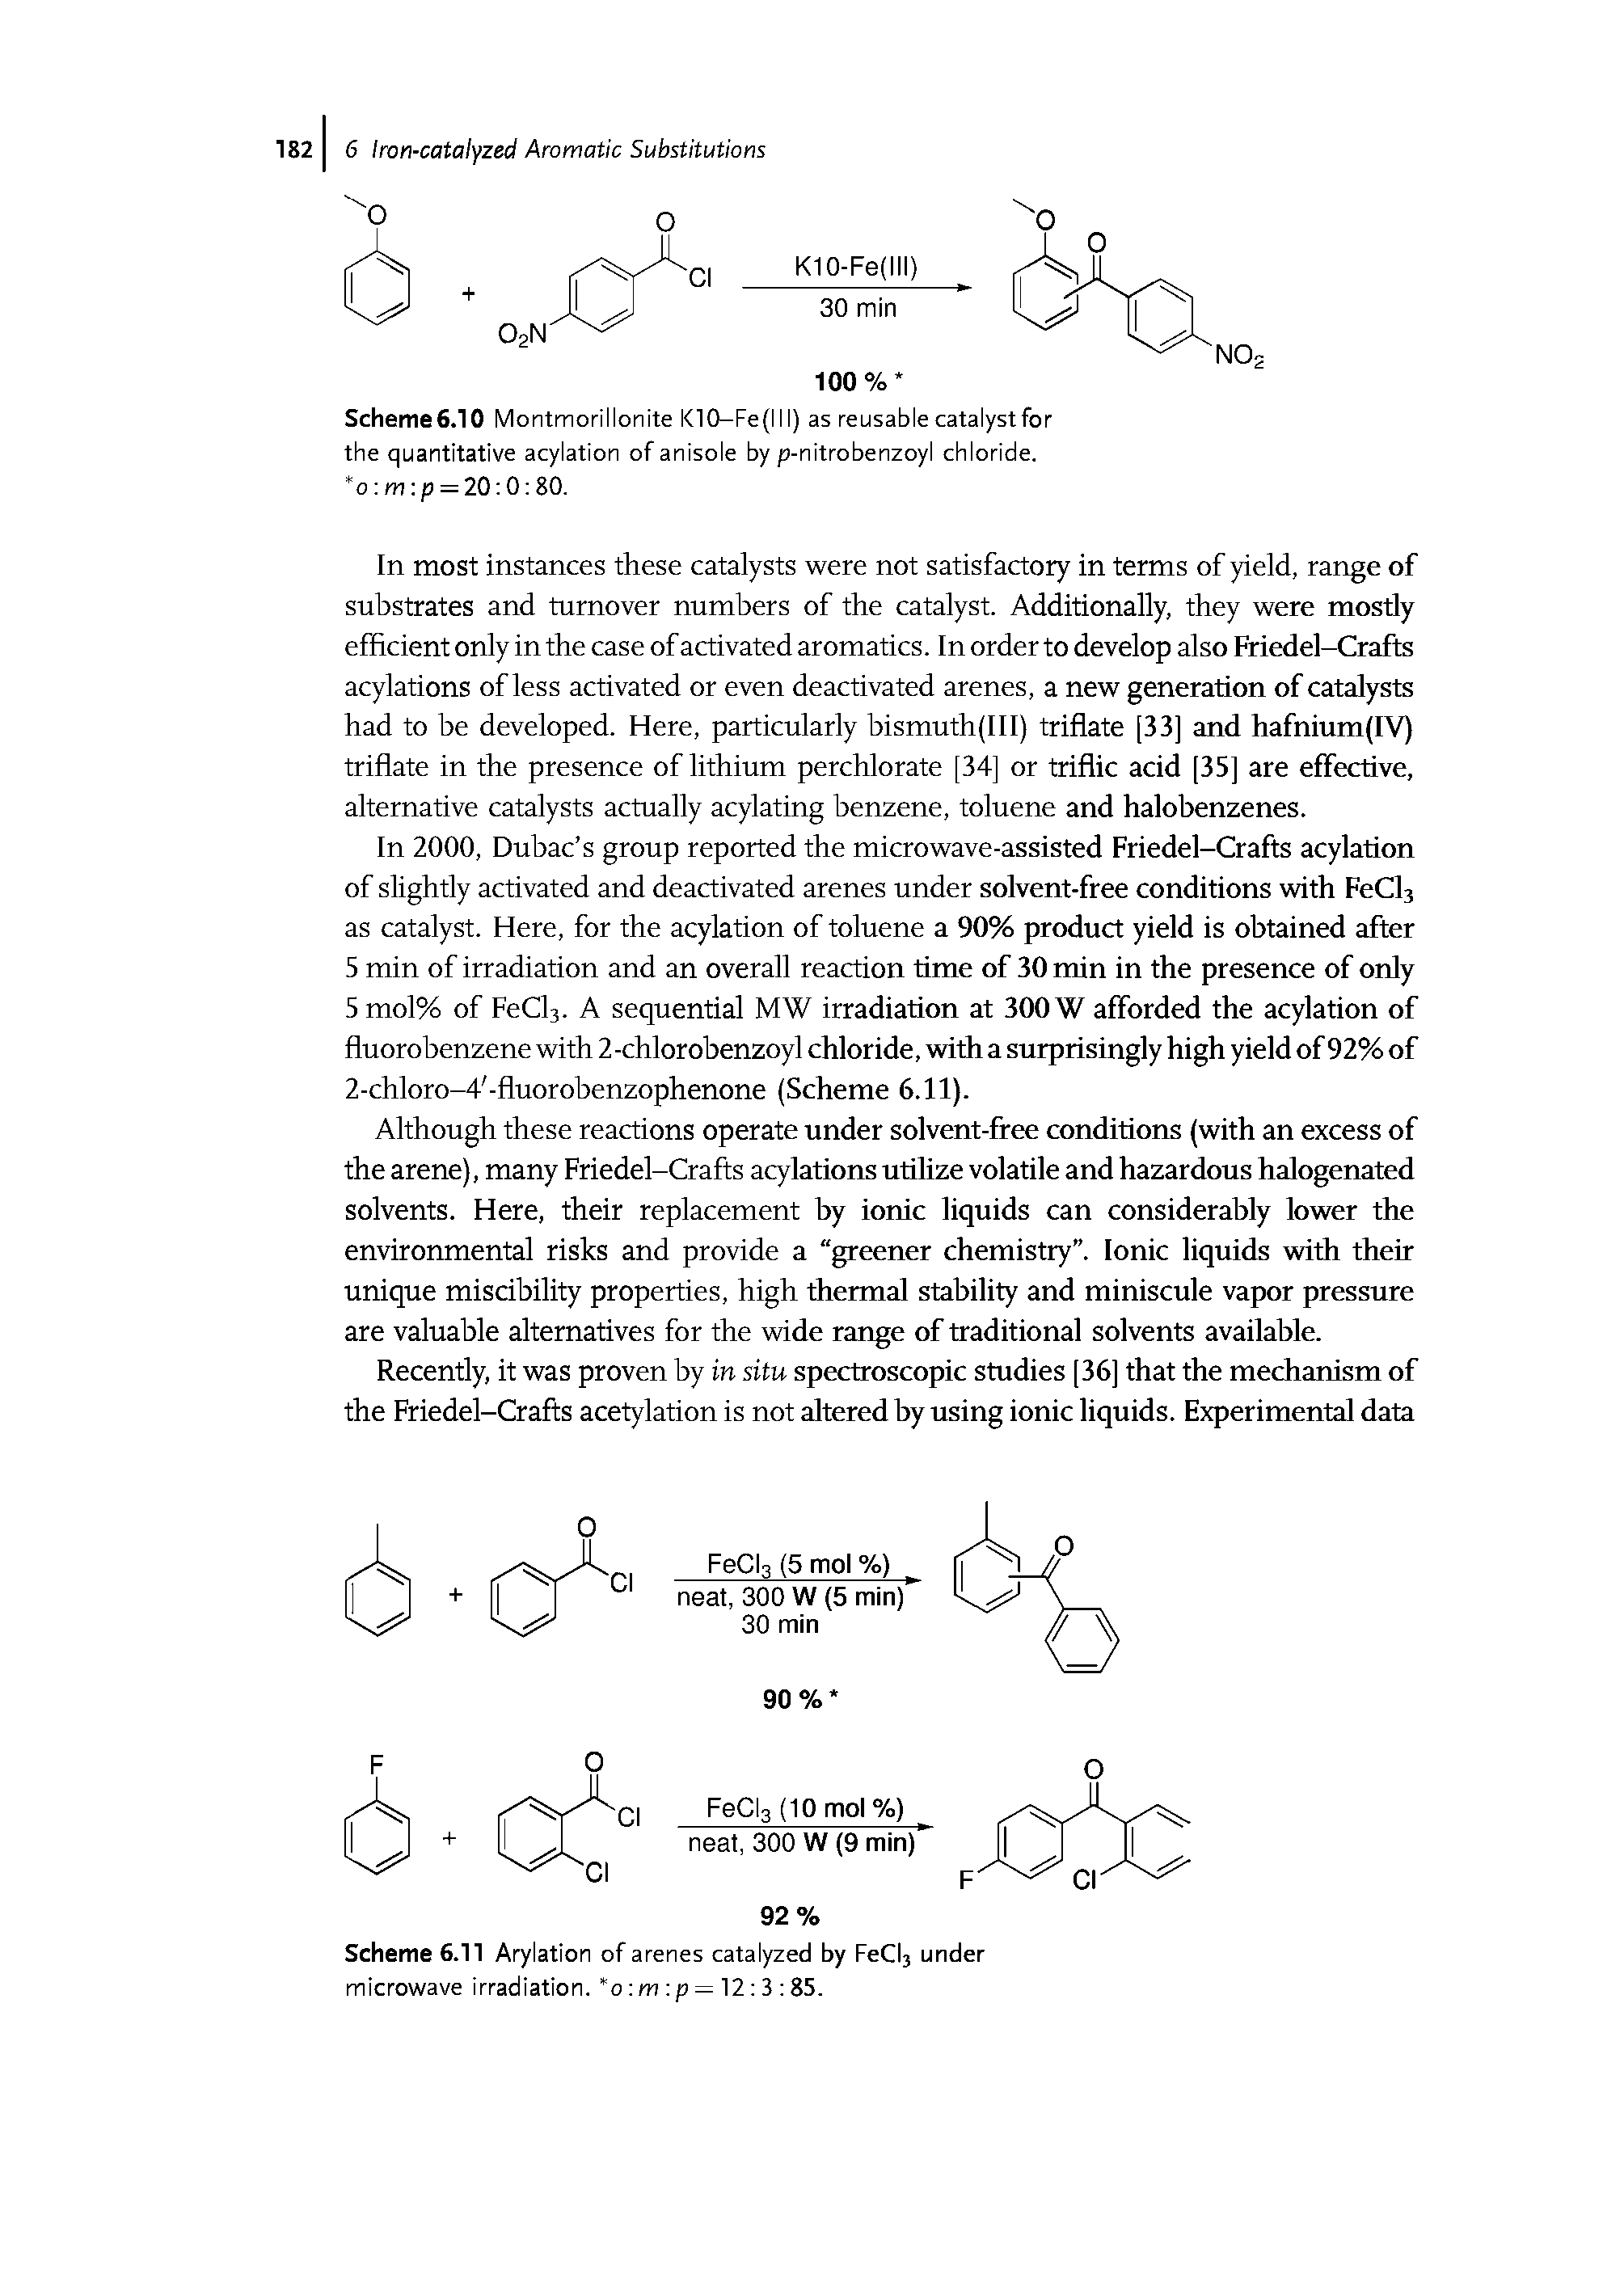 Scheme 6.10 Montmoril Ionite I<10—Fe (111) as reusable catalyst for the quantitative acylation of anisole by p-nitrobenzoyl chloride.